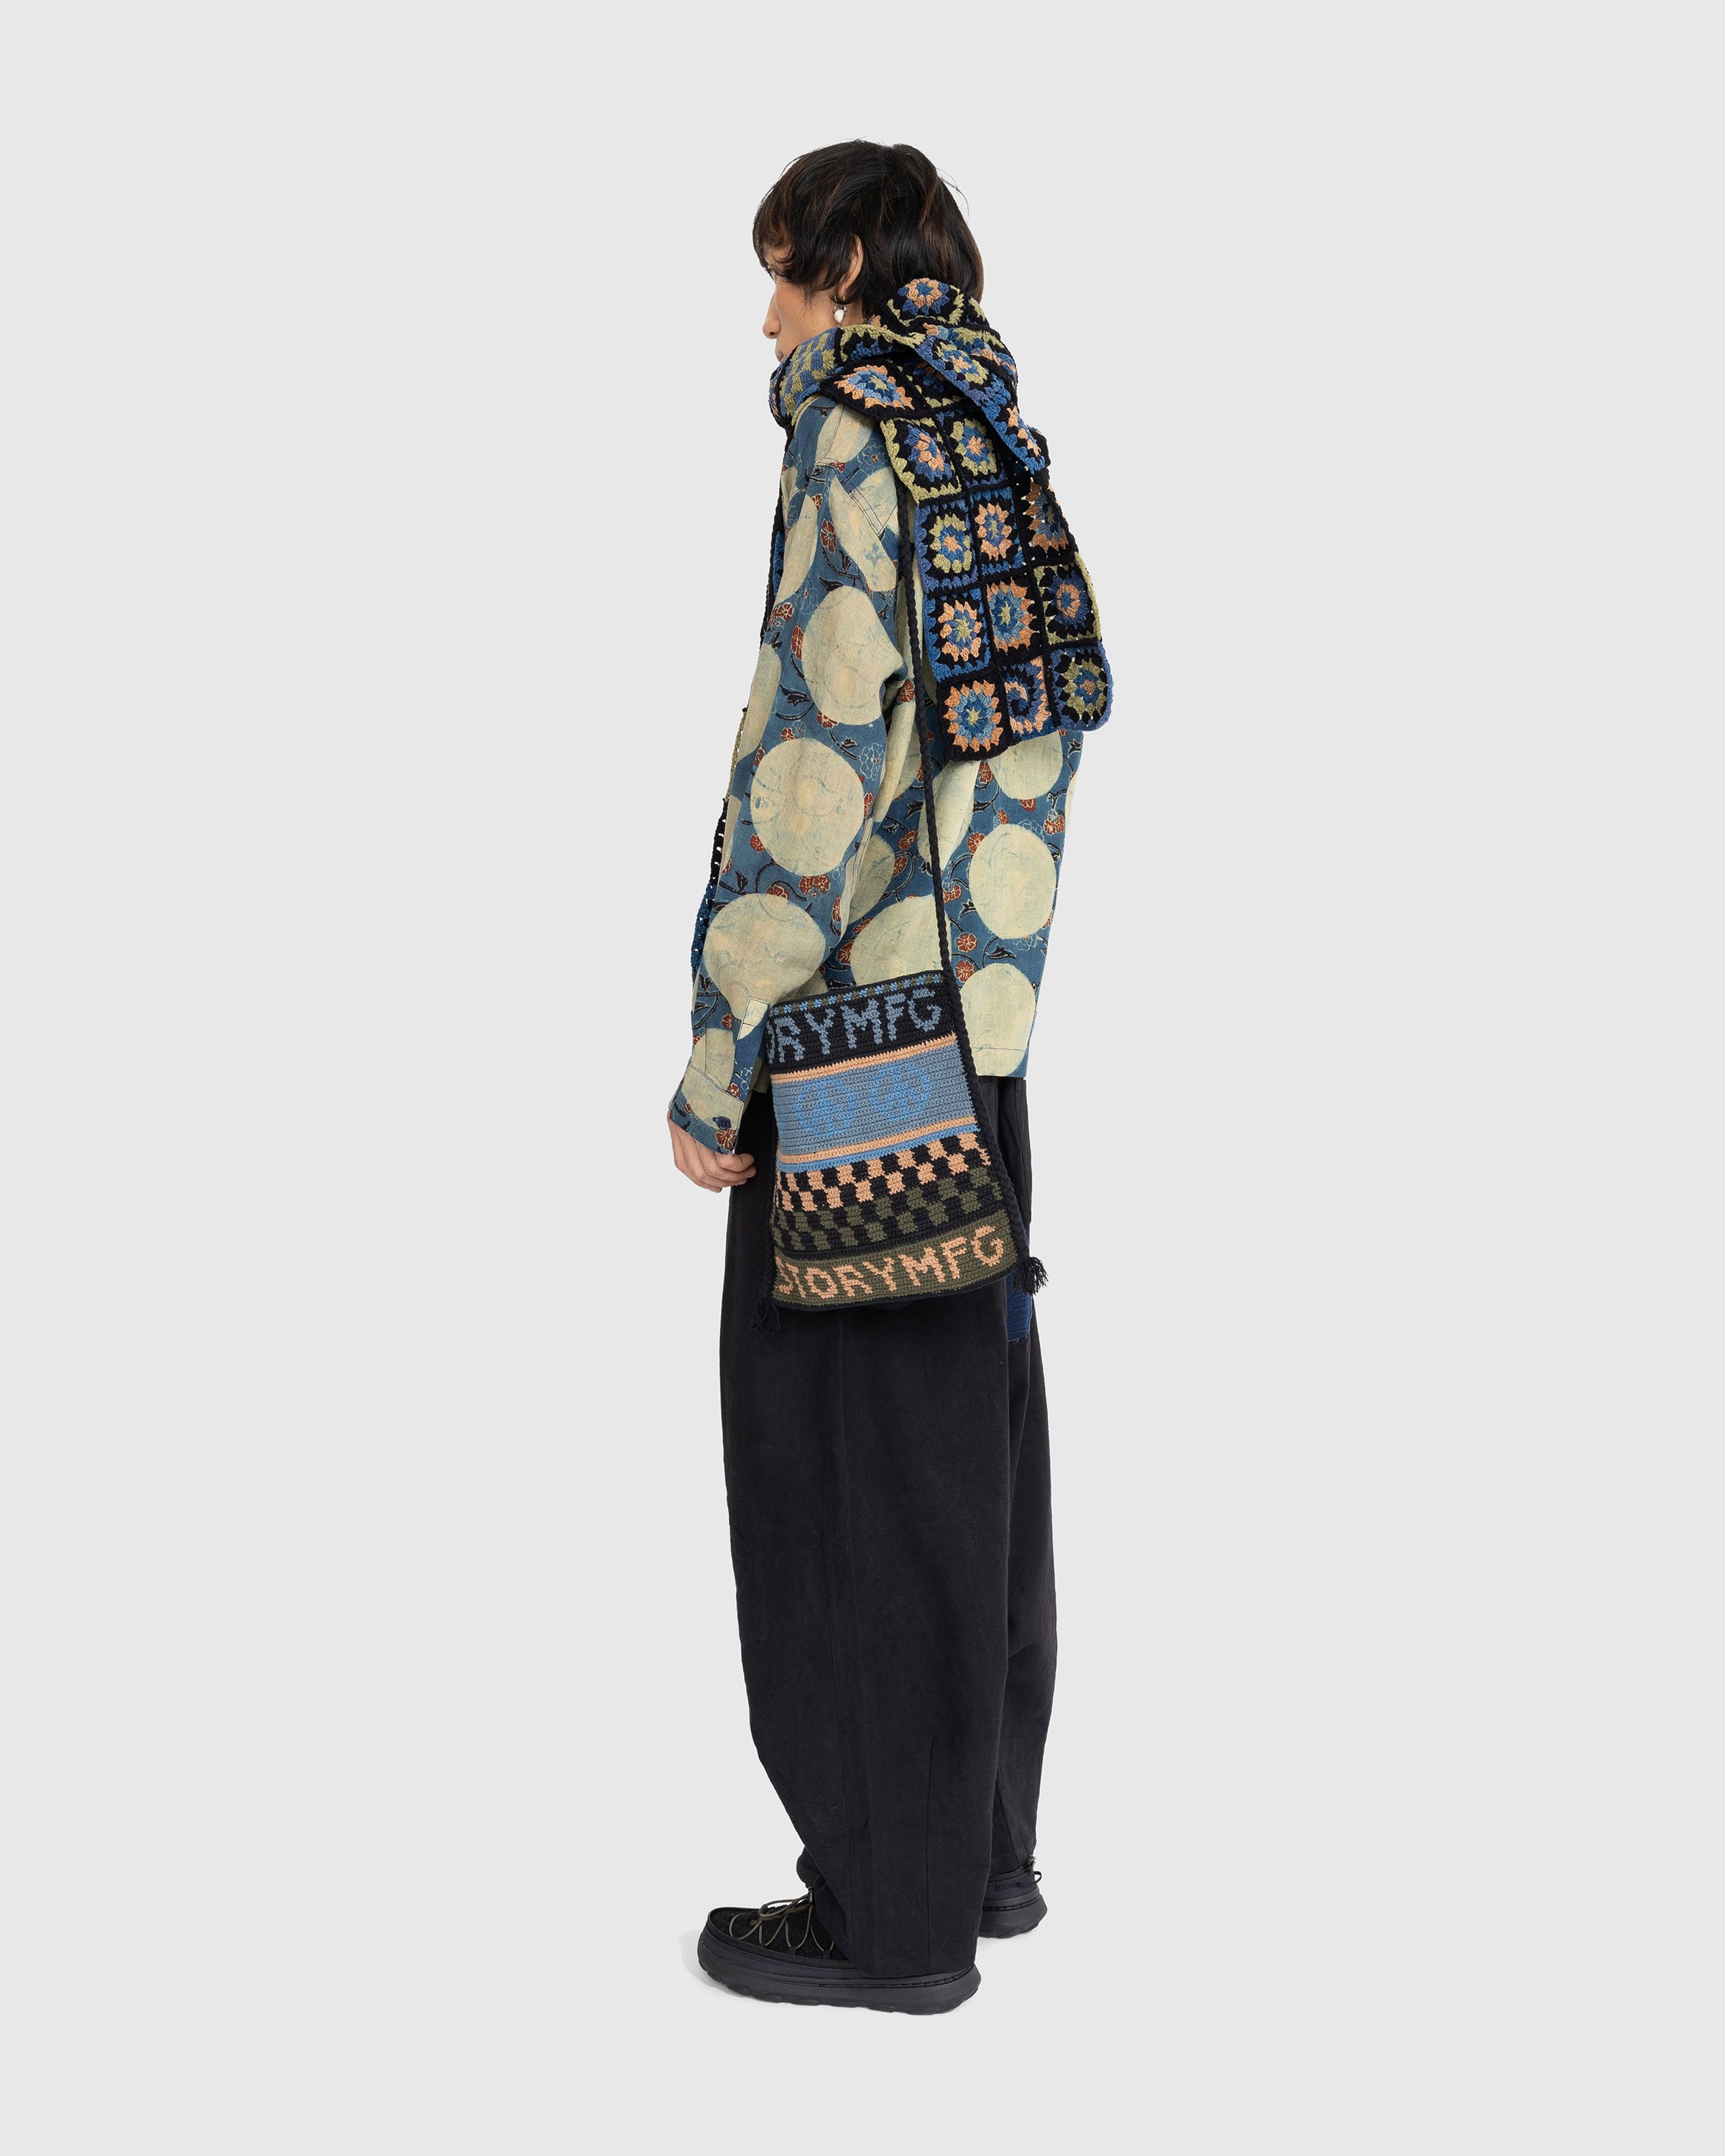 Story mfg. - Piece Scarf Slim Multi - Accessories - undefined - Image 5